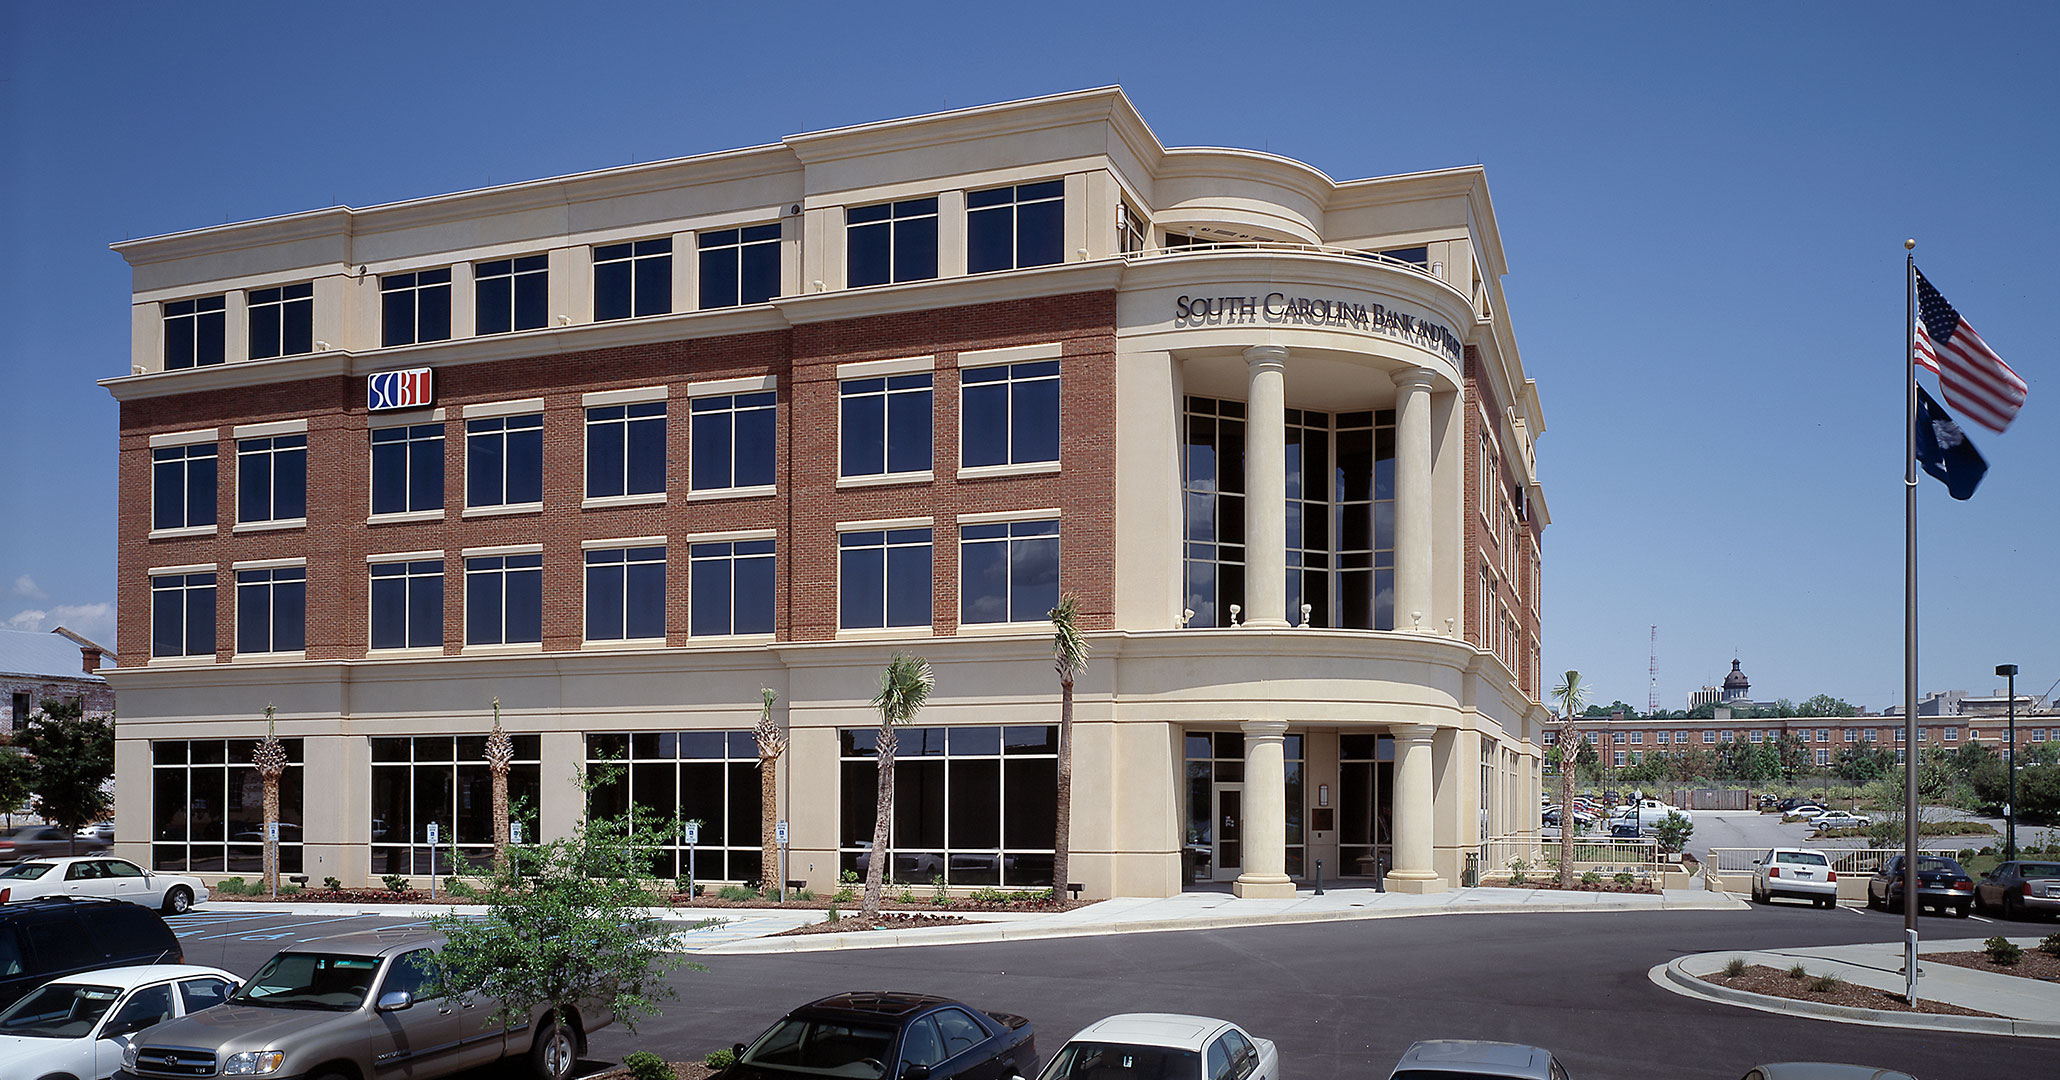 Boudreaux architects worked with South State Bank to provide high-end interior design services for their workplace.